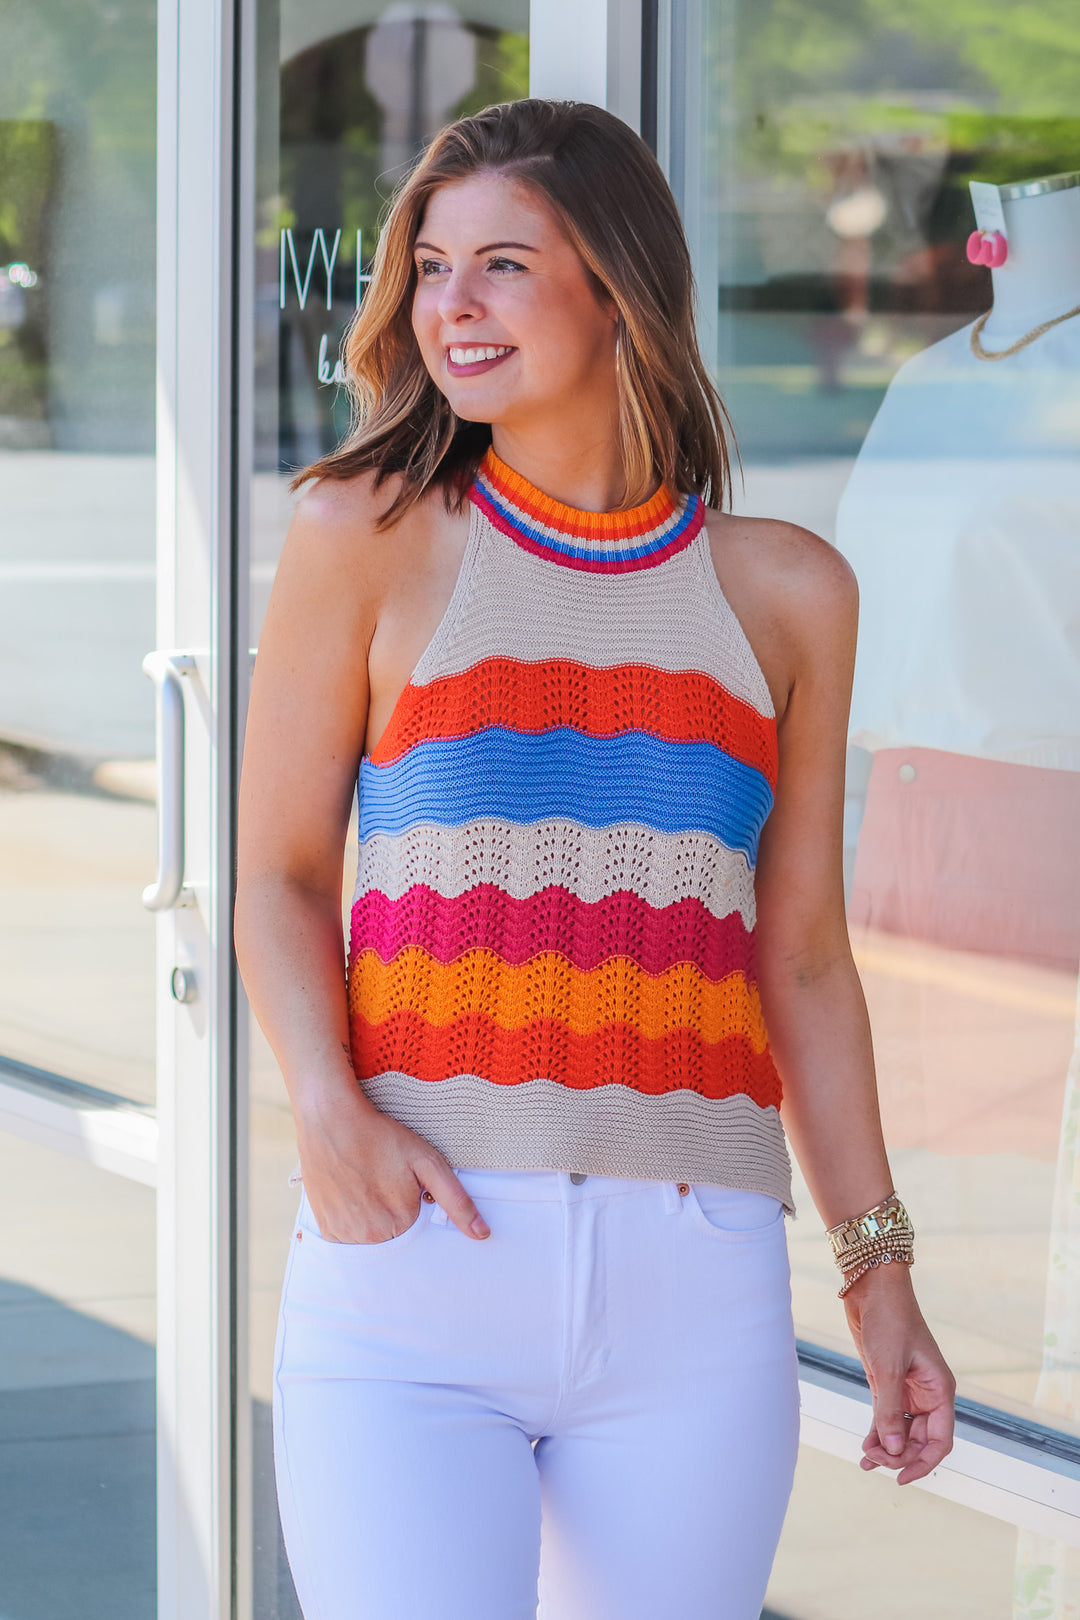 Brunette girl wearing a striped crochet halter top standing in front of a store with her hand in her pocket.